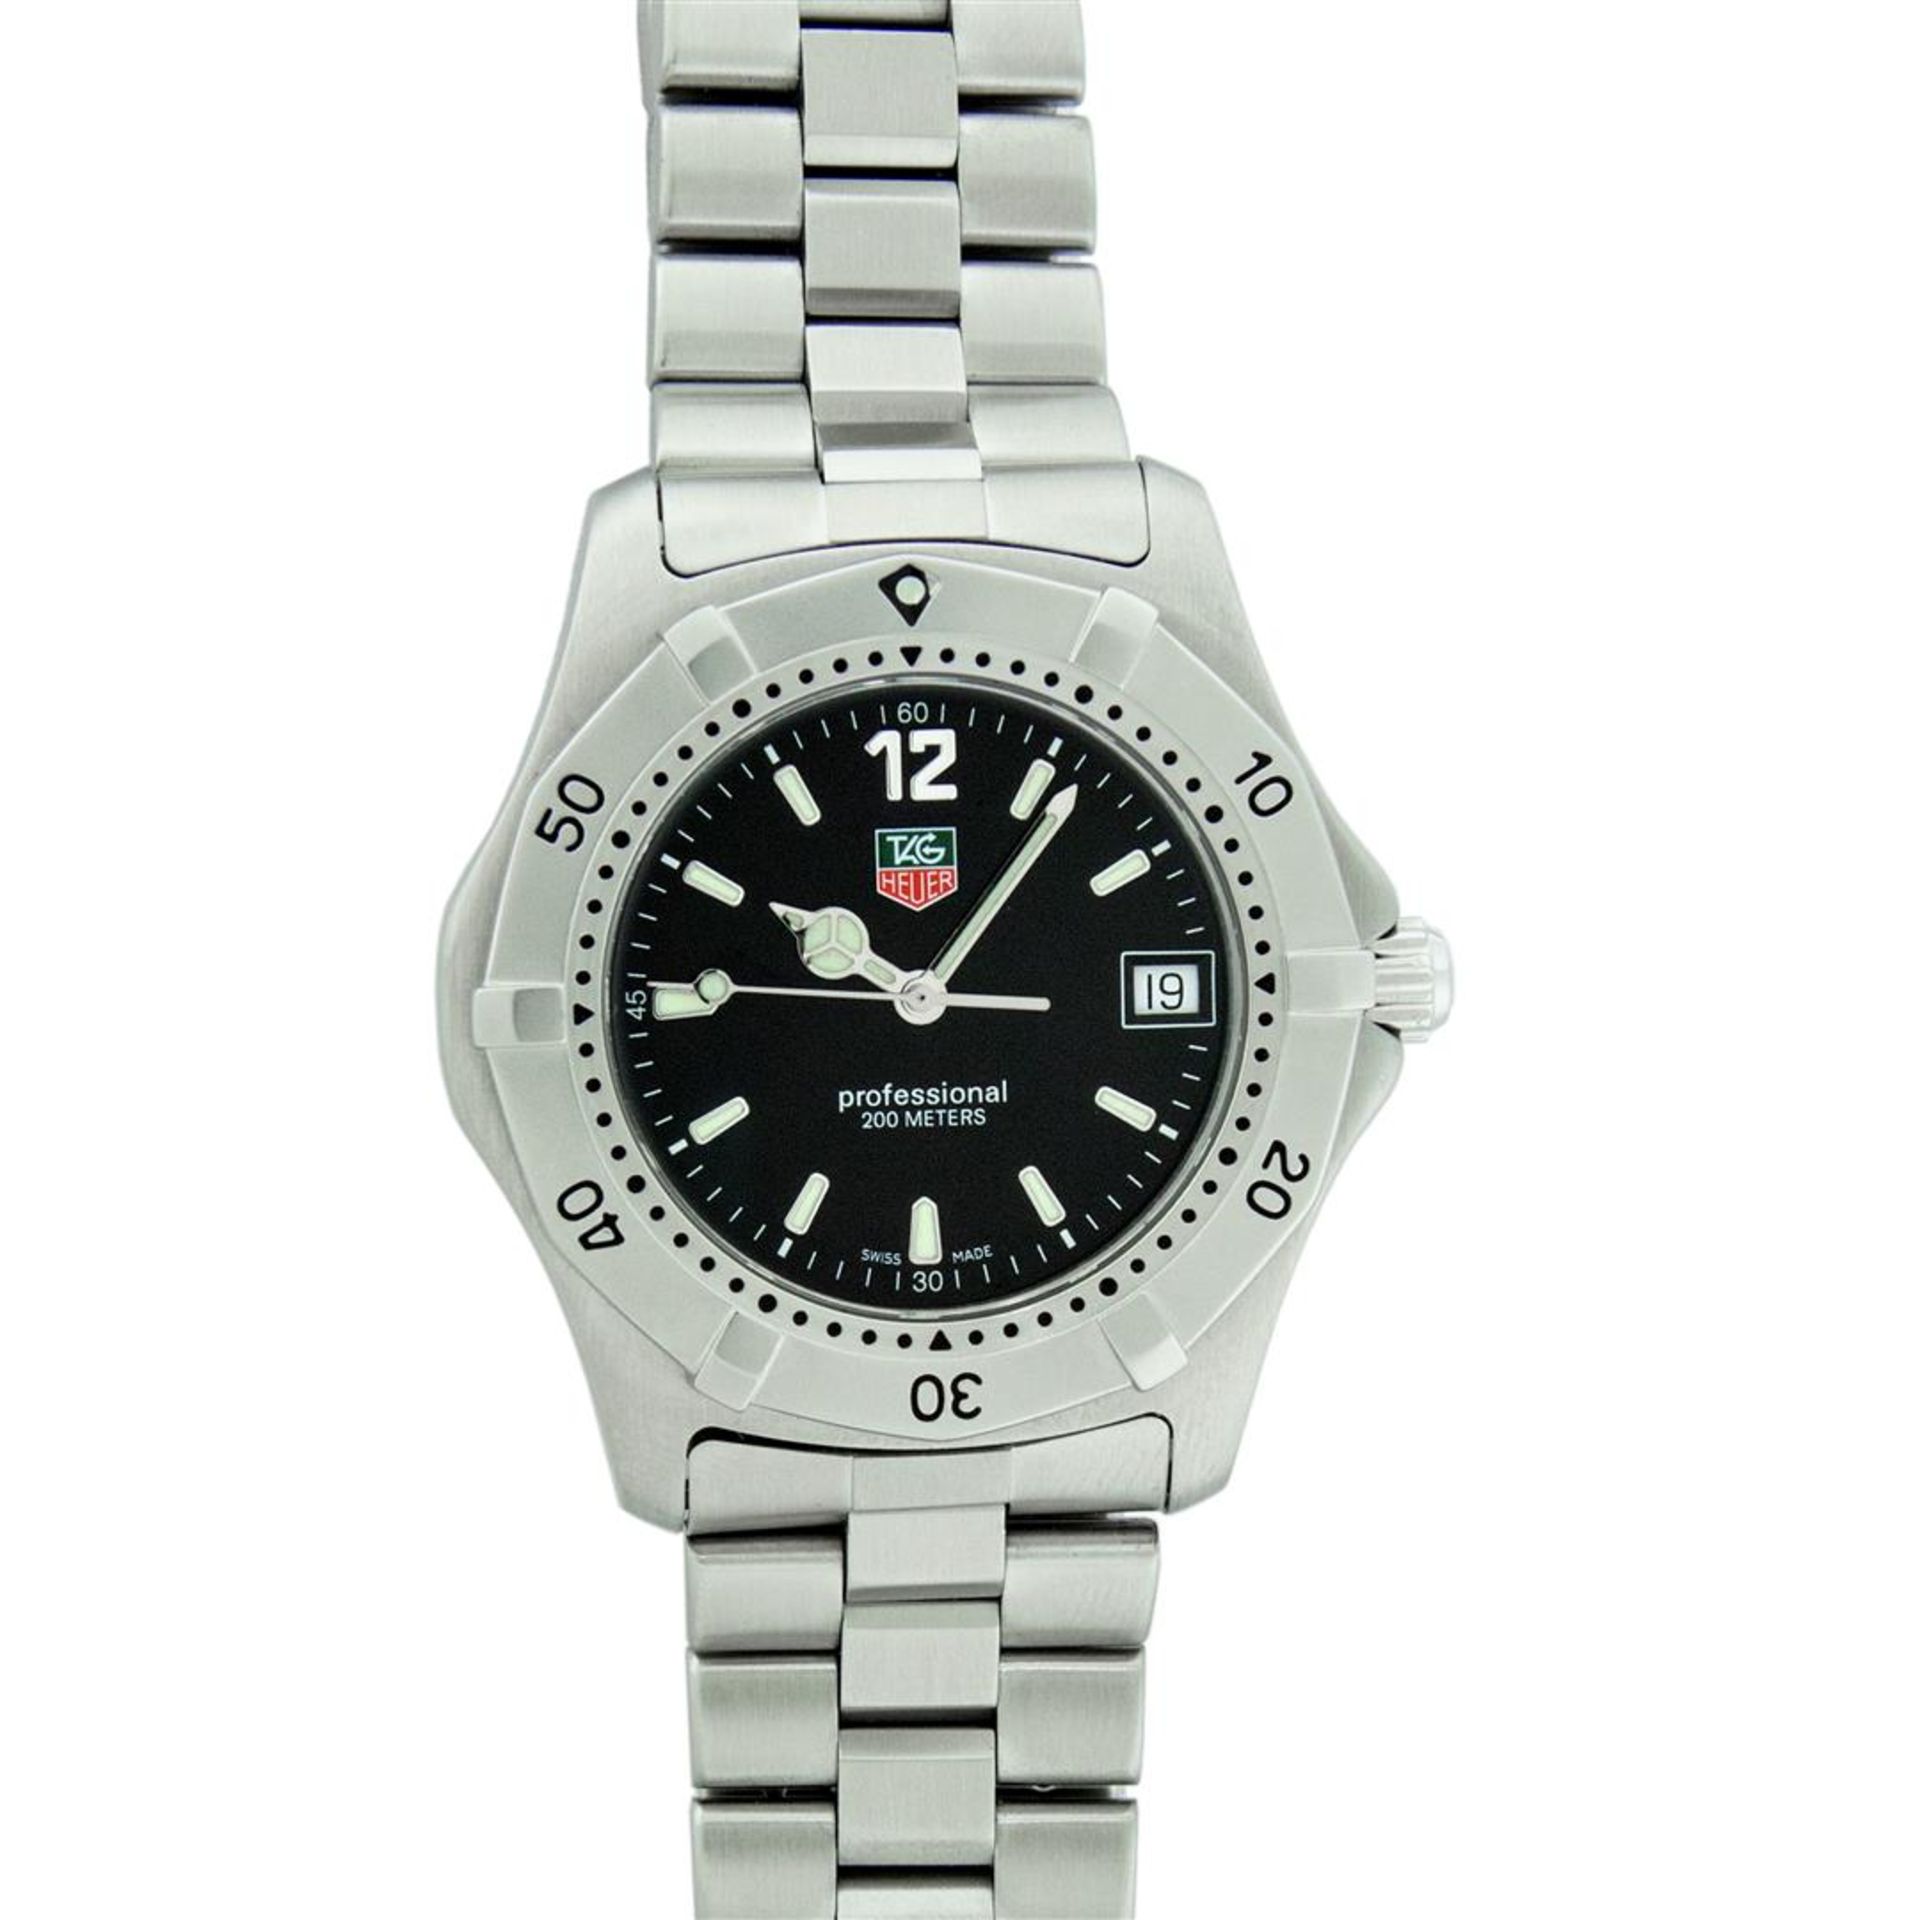 Tag Heuer Unisex Stainless Steel Black Dial 37mm Professional Series Wristwatch - Image 2 of 9